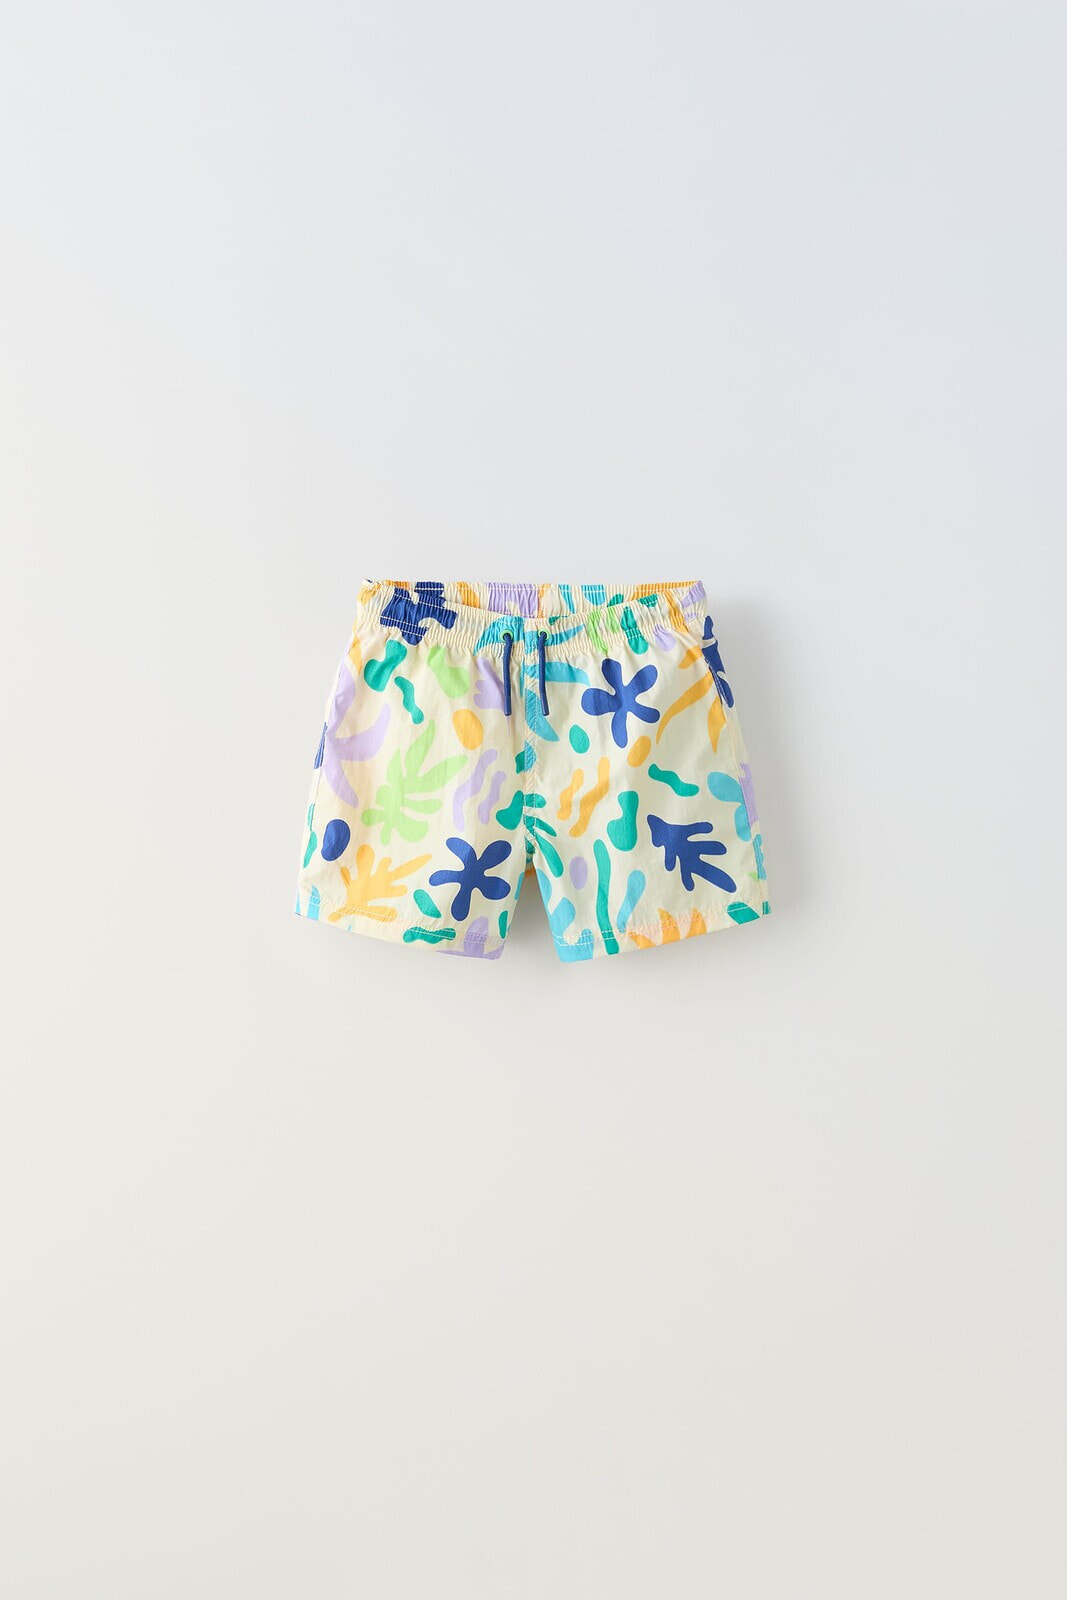 6-14 years/ swim shorts with sun and leaf print